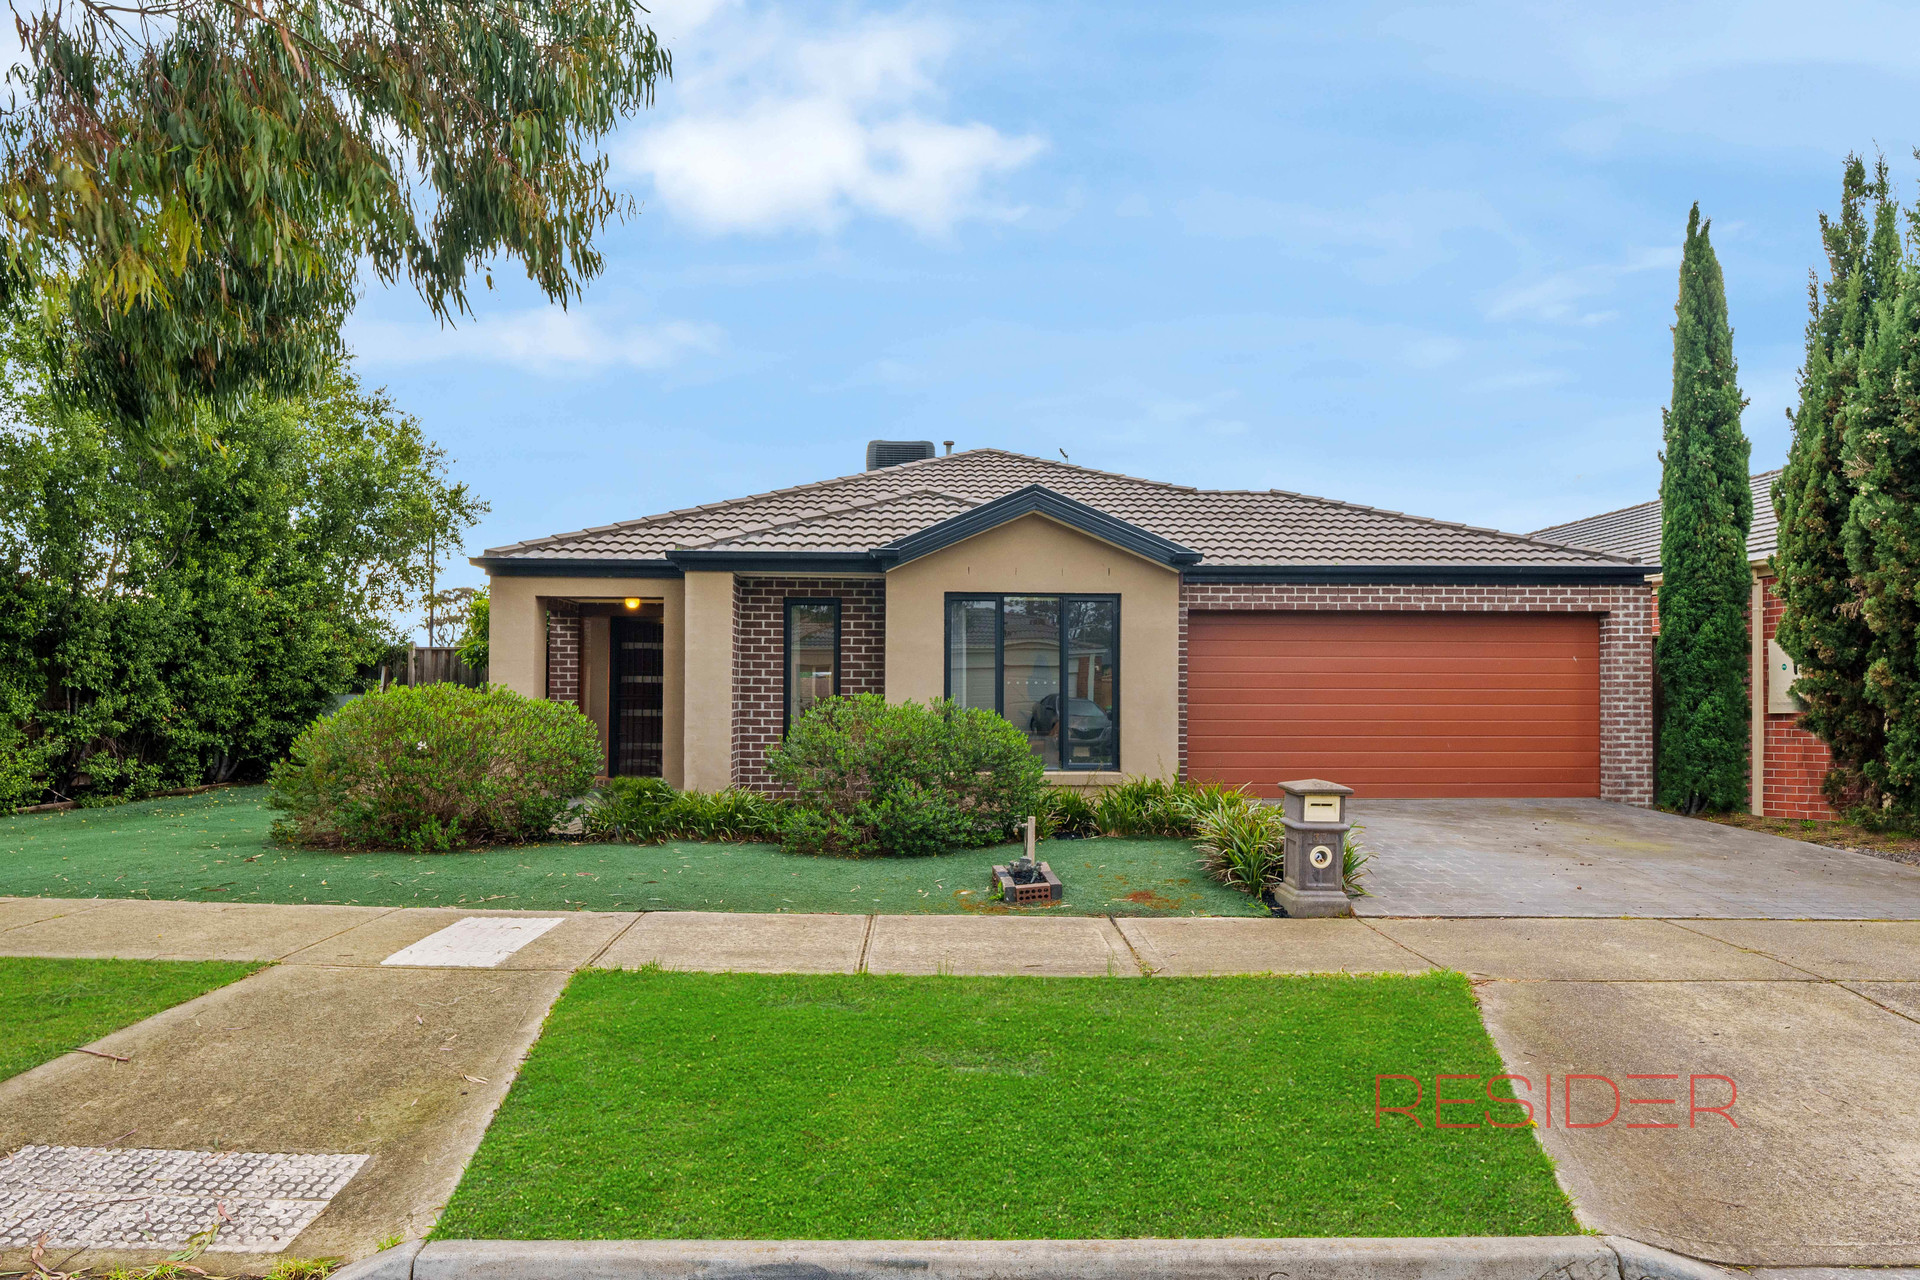 Sold House 37 Tuross Crescent, South Morang VIC 3752 - Oct 29, 2022 ...